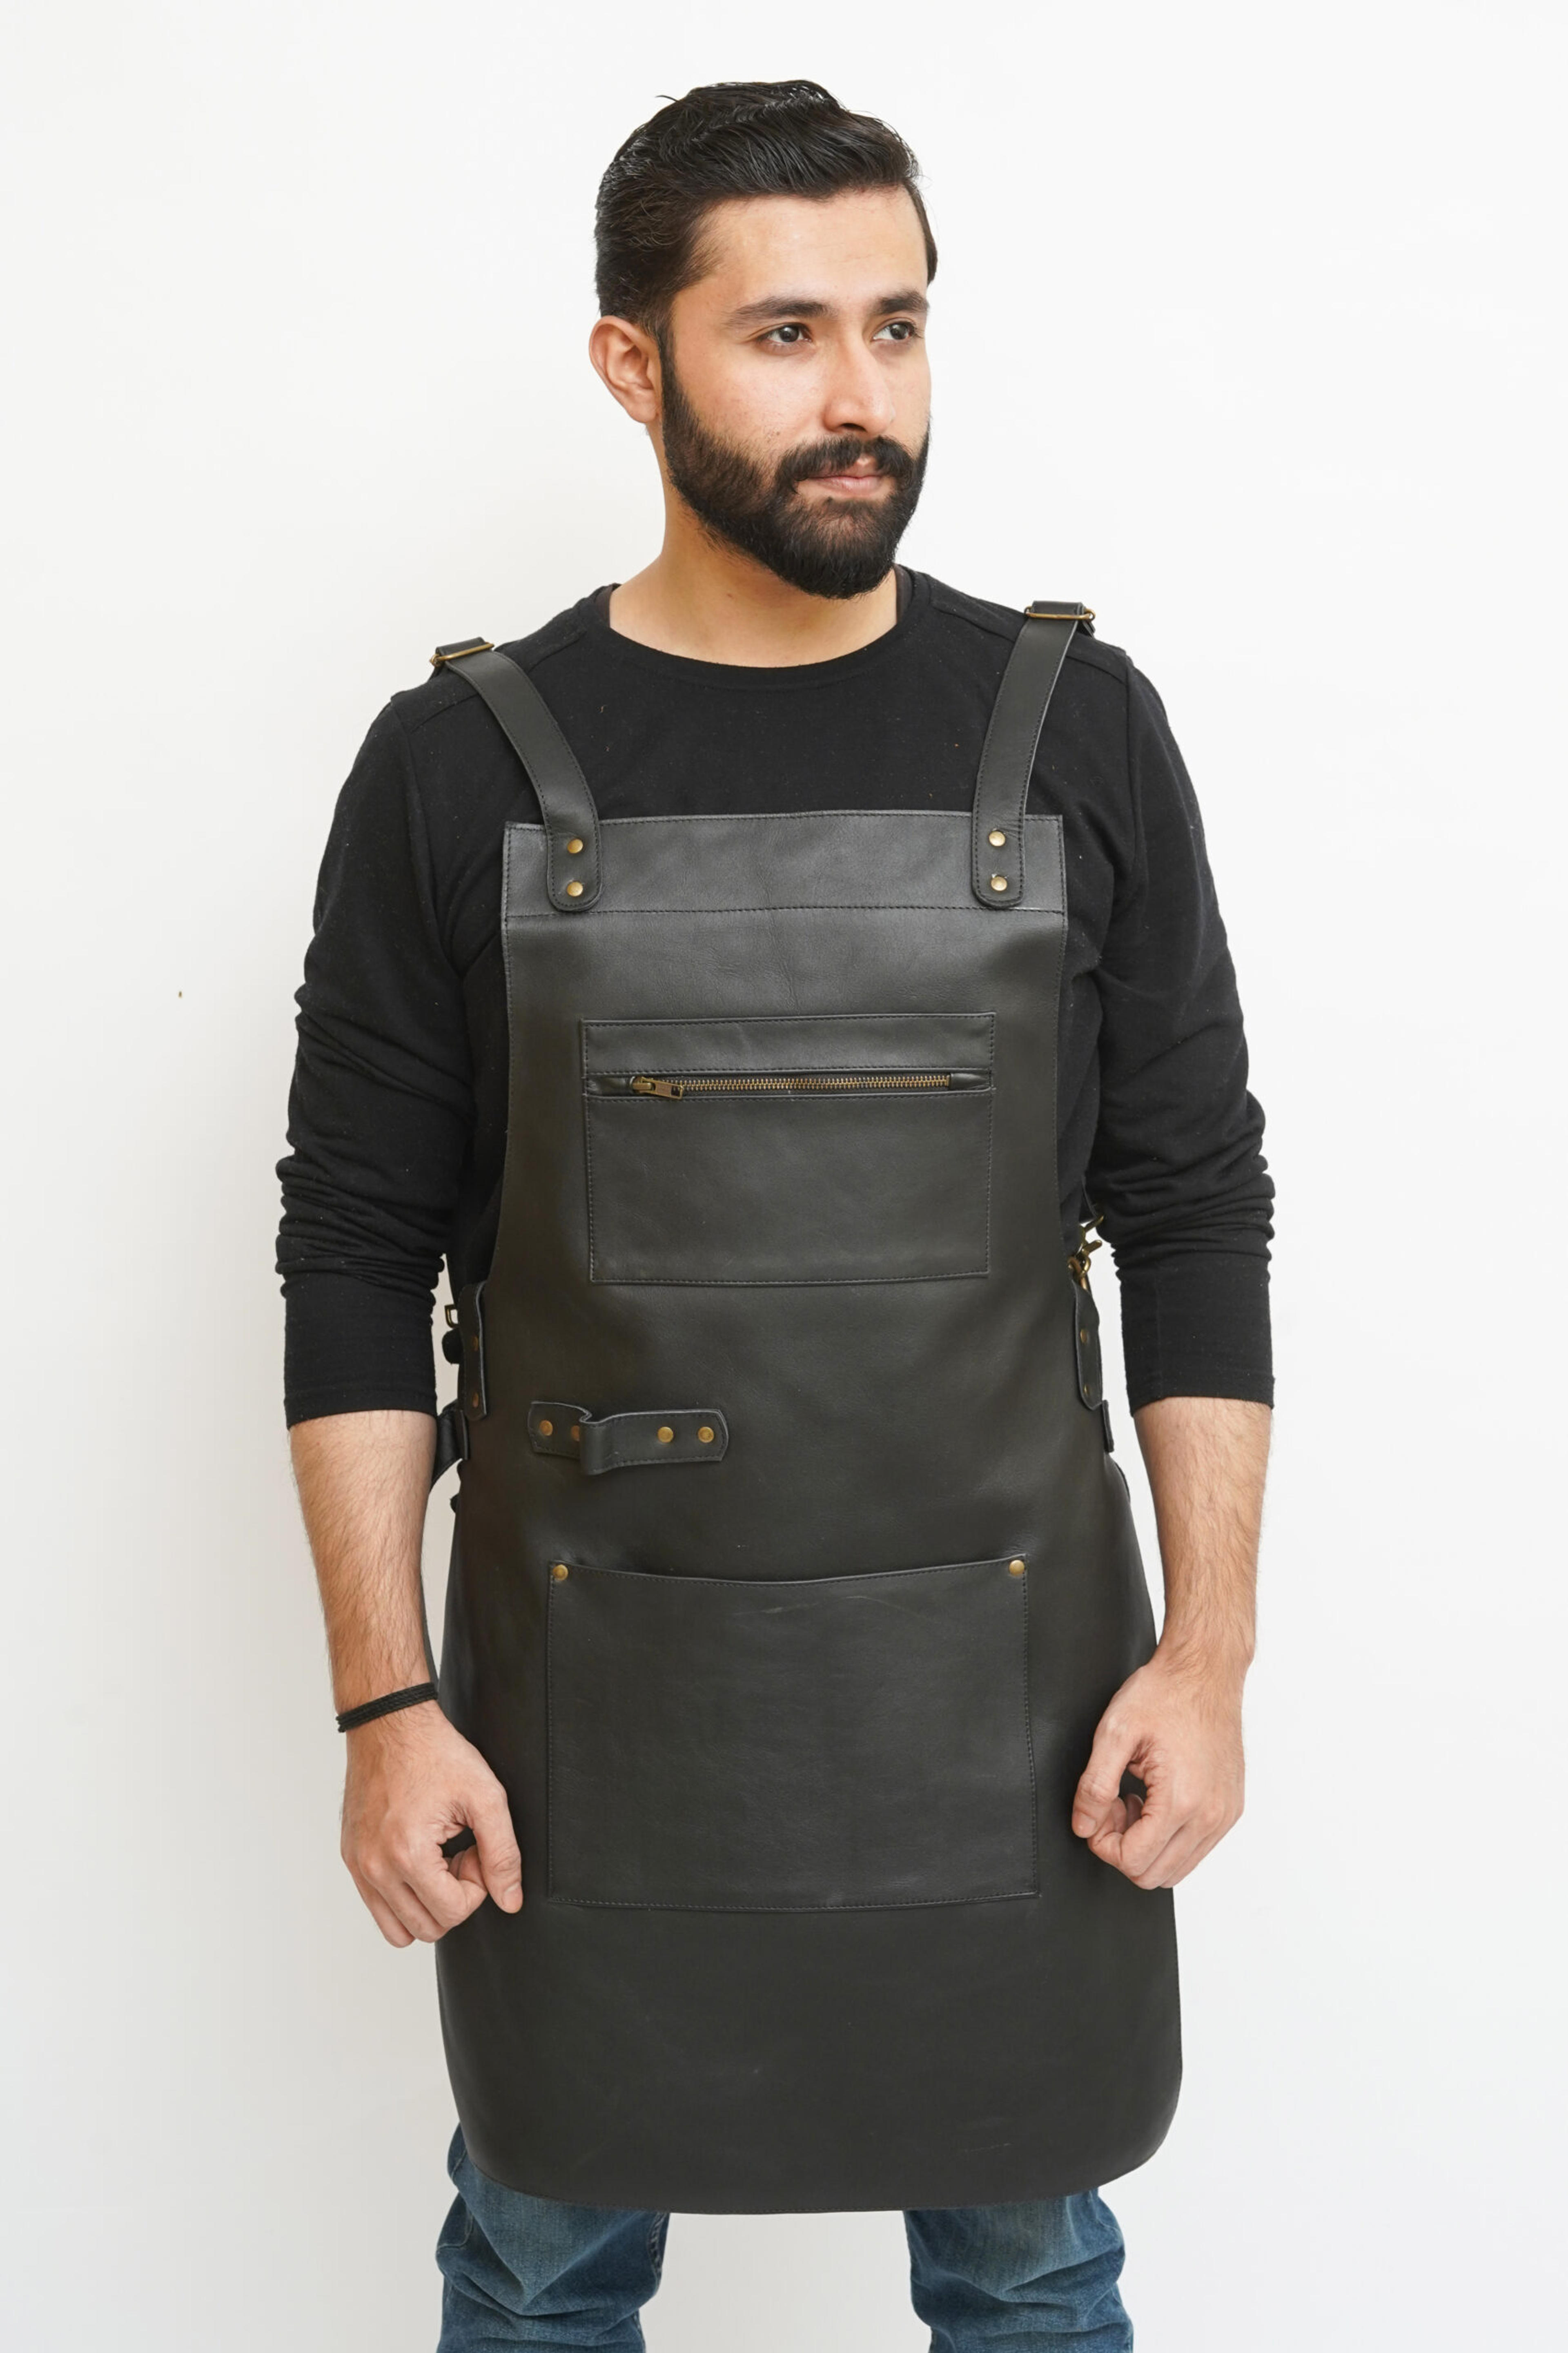 Black Leather Apron with Multiple Pocket and Tool Holder